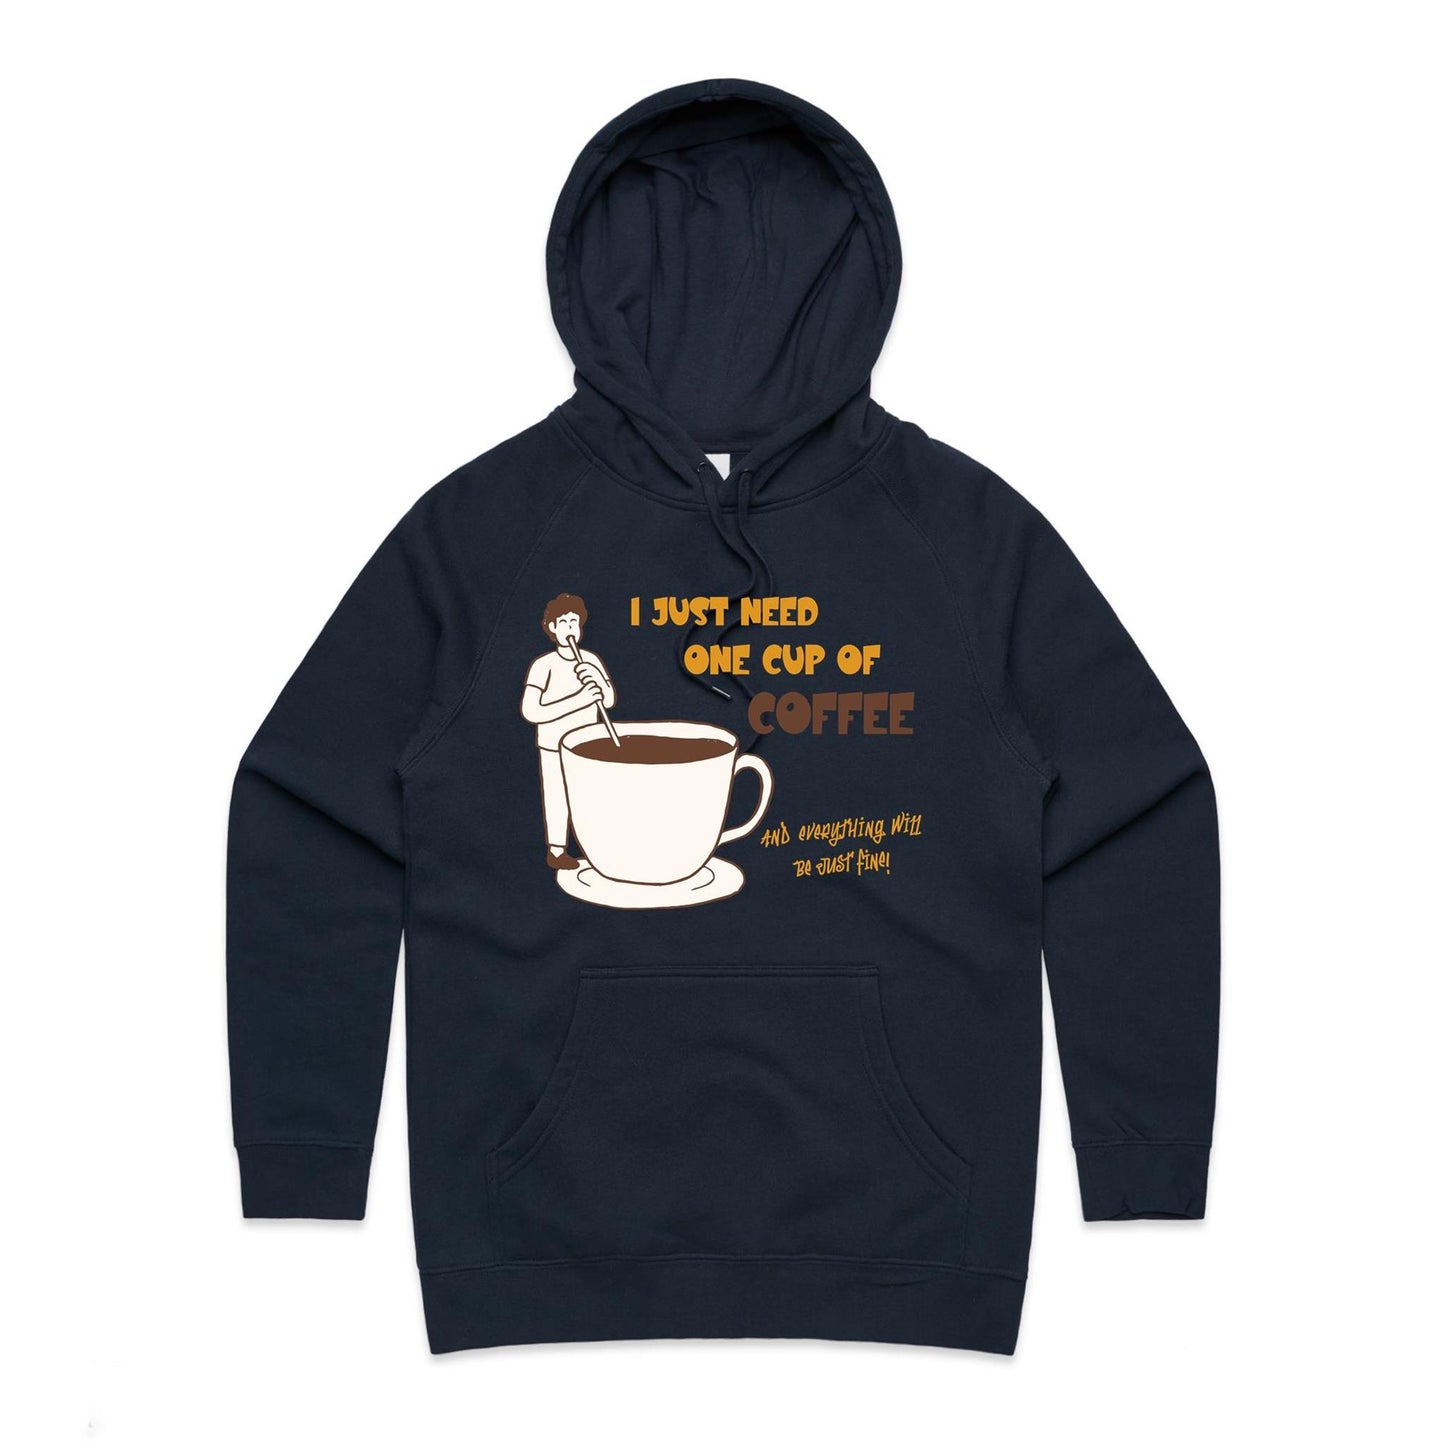 I Just Need One Cup Of Coffee And Everything Will Be Just Fine - Women's Supply Hood Navy Womens Supply Hoodie Coffee